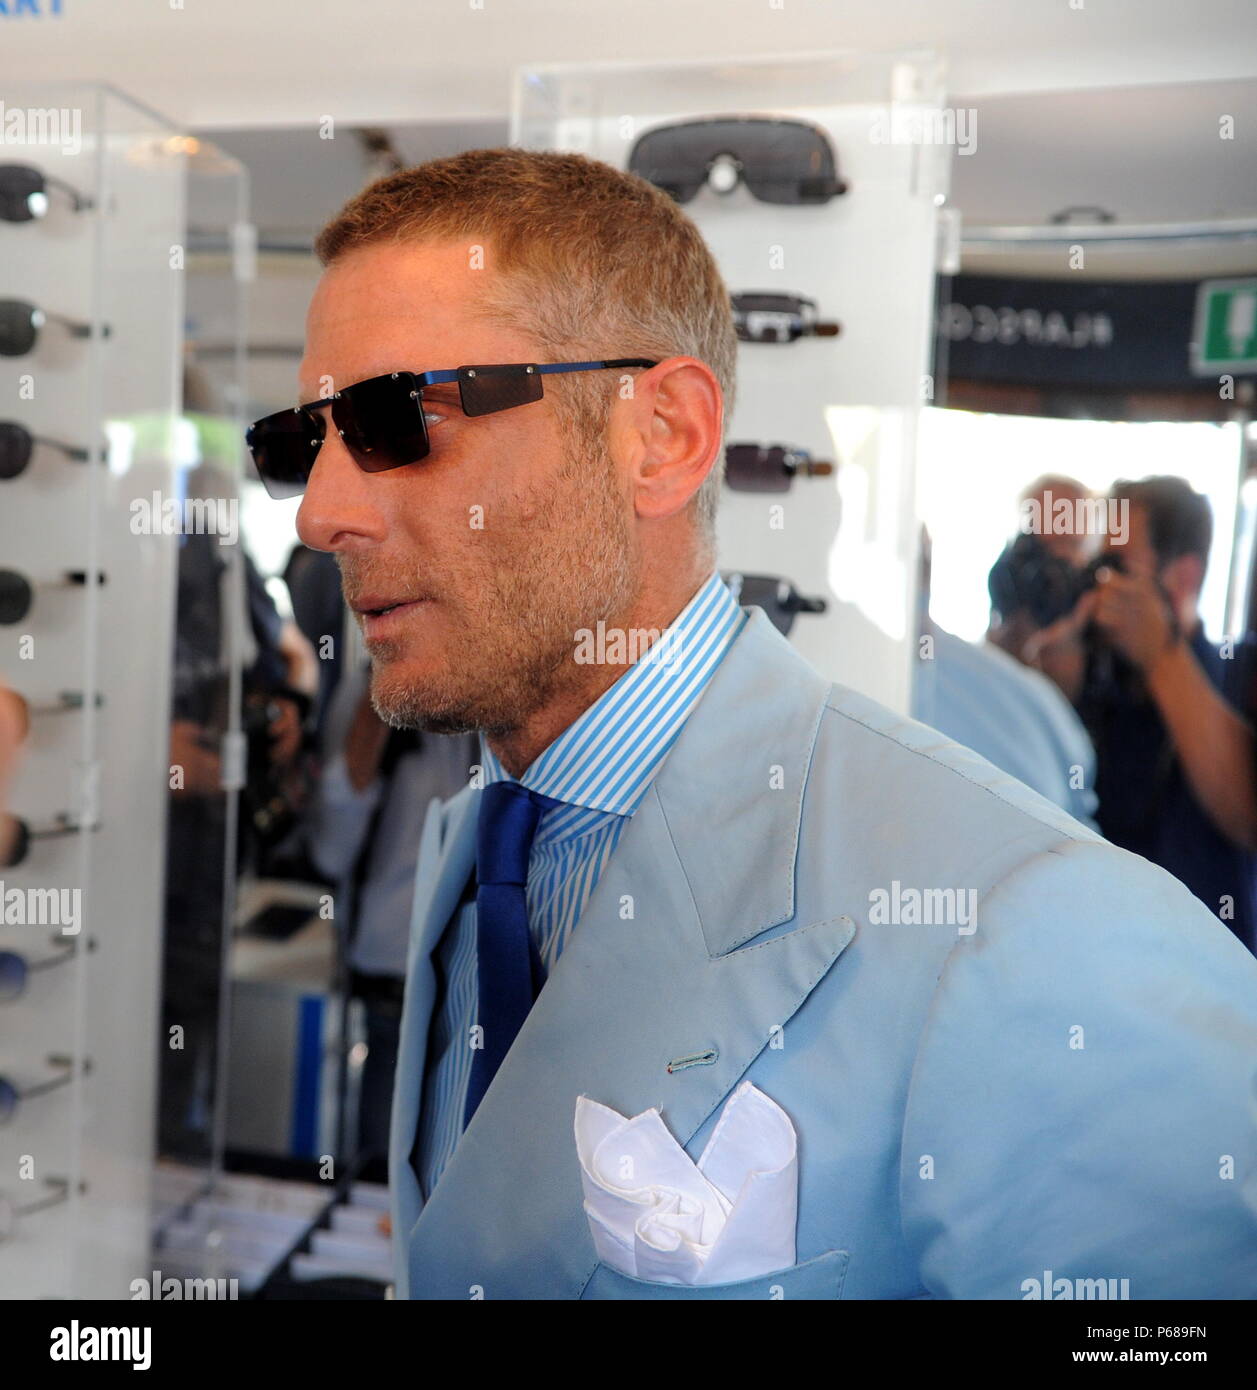 Milan, Lapo Elkann presents his new line of LAPS eyeglasses on the tram Lapo  Elkann arrives in Piazza Fontana to present his new eyewear line to the  press. For this reason he